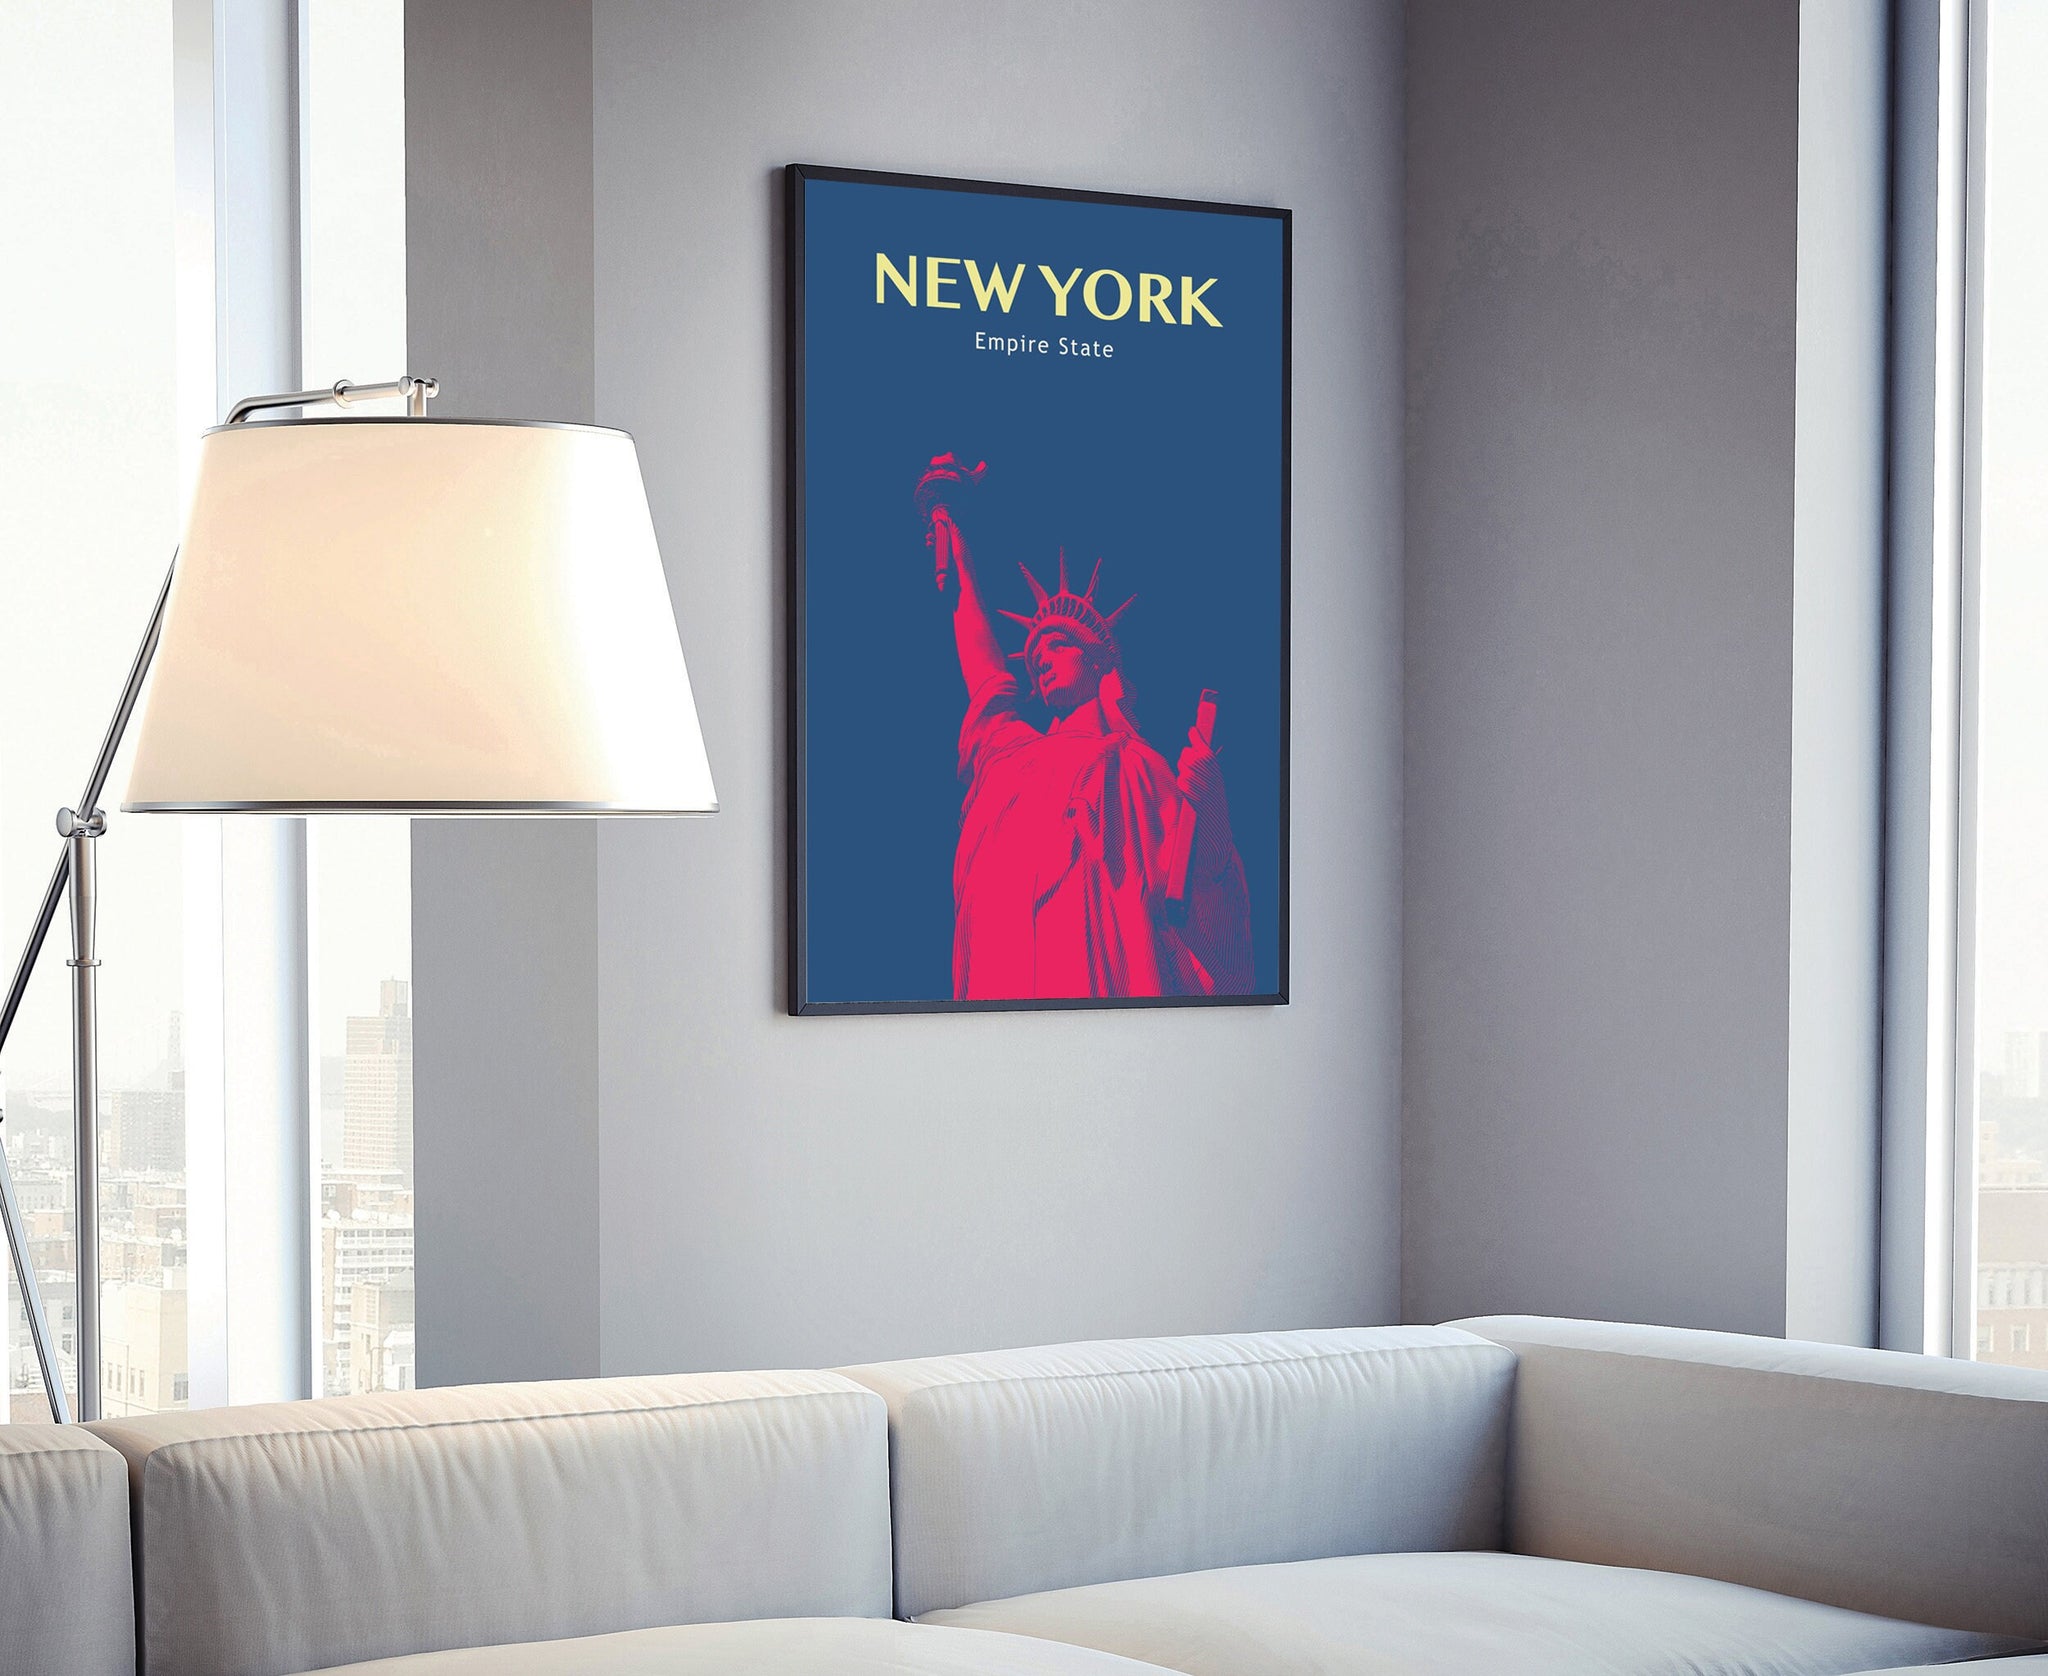 New York Vintage Rustic Poster Print, Retro Style Travel Poster